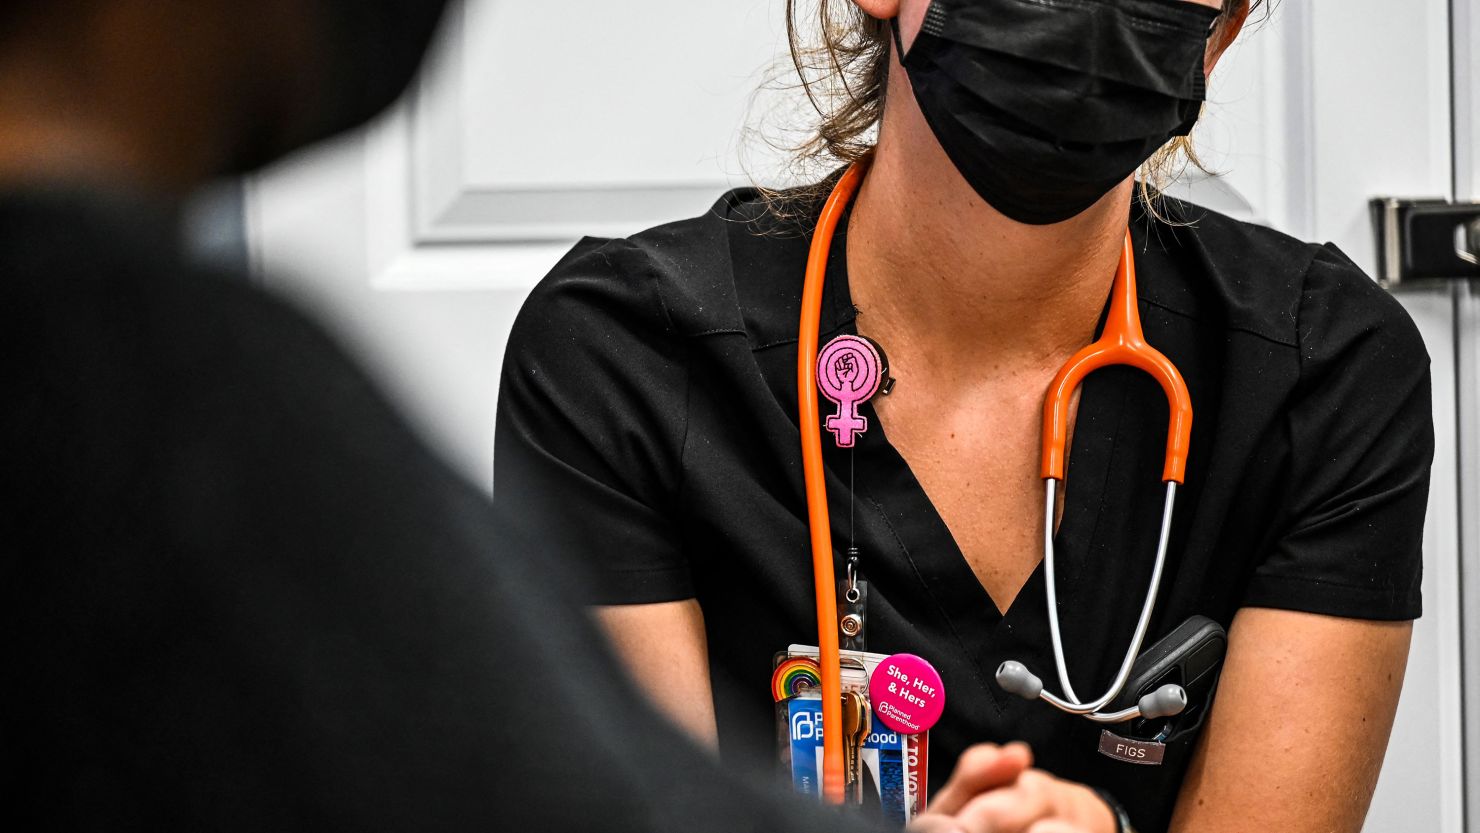 A woman who chose to remain anonymous has her vitals checked before receiving an abortion at a Planned Parenthood Abortion Clinic in Jacksonville, Florida. A six-week ban takes effect in the state on May 1.